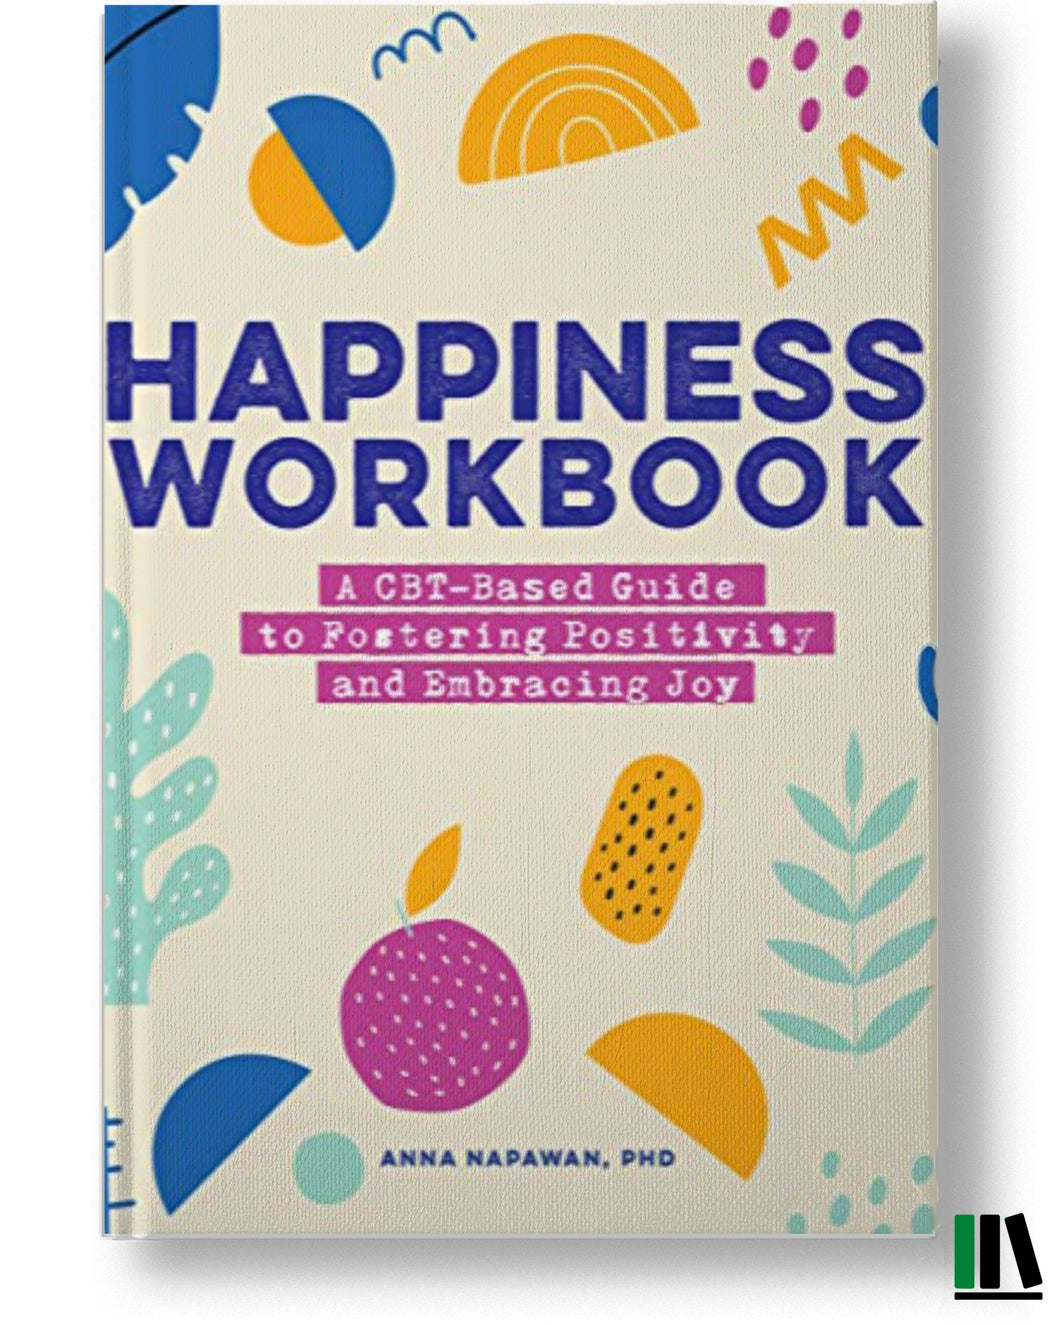 Happiness Workbook: A CBT-Based Guide to Foster Positivity and Embrace Joy